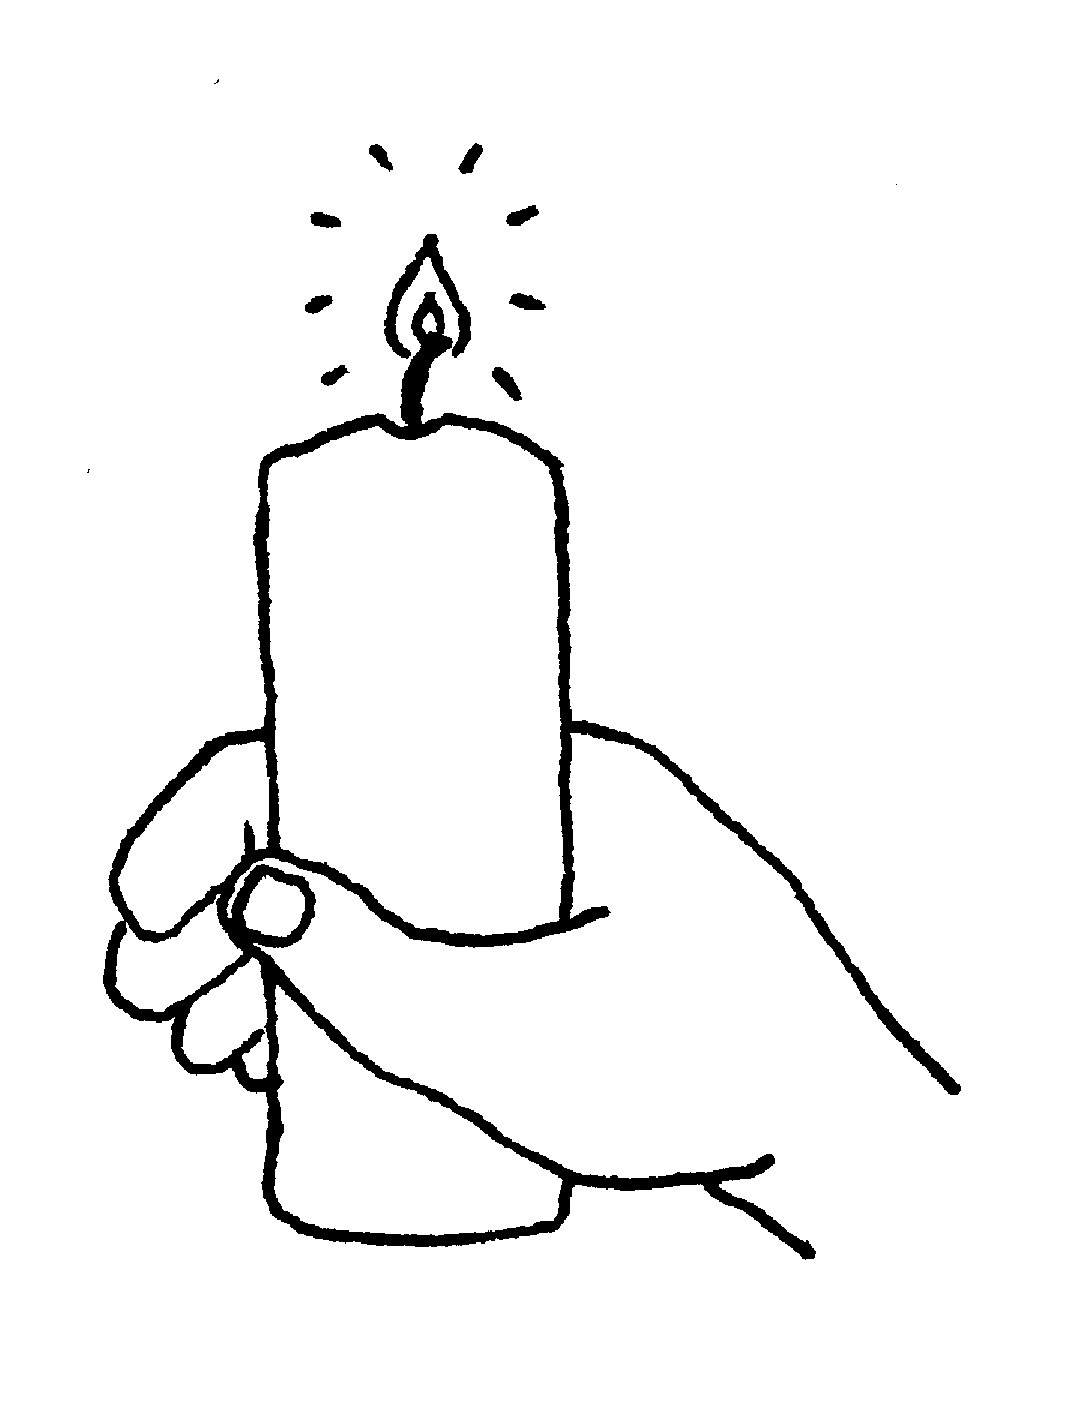 Candle all souls clipart reverend ally